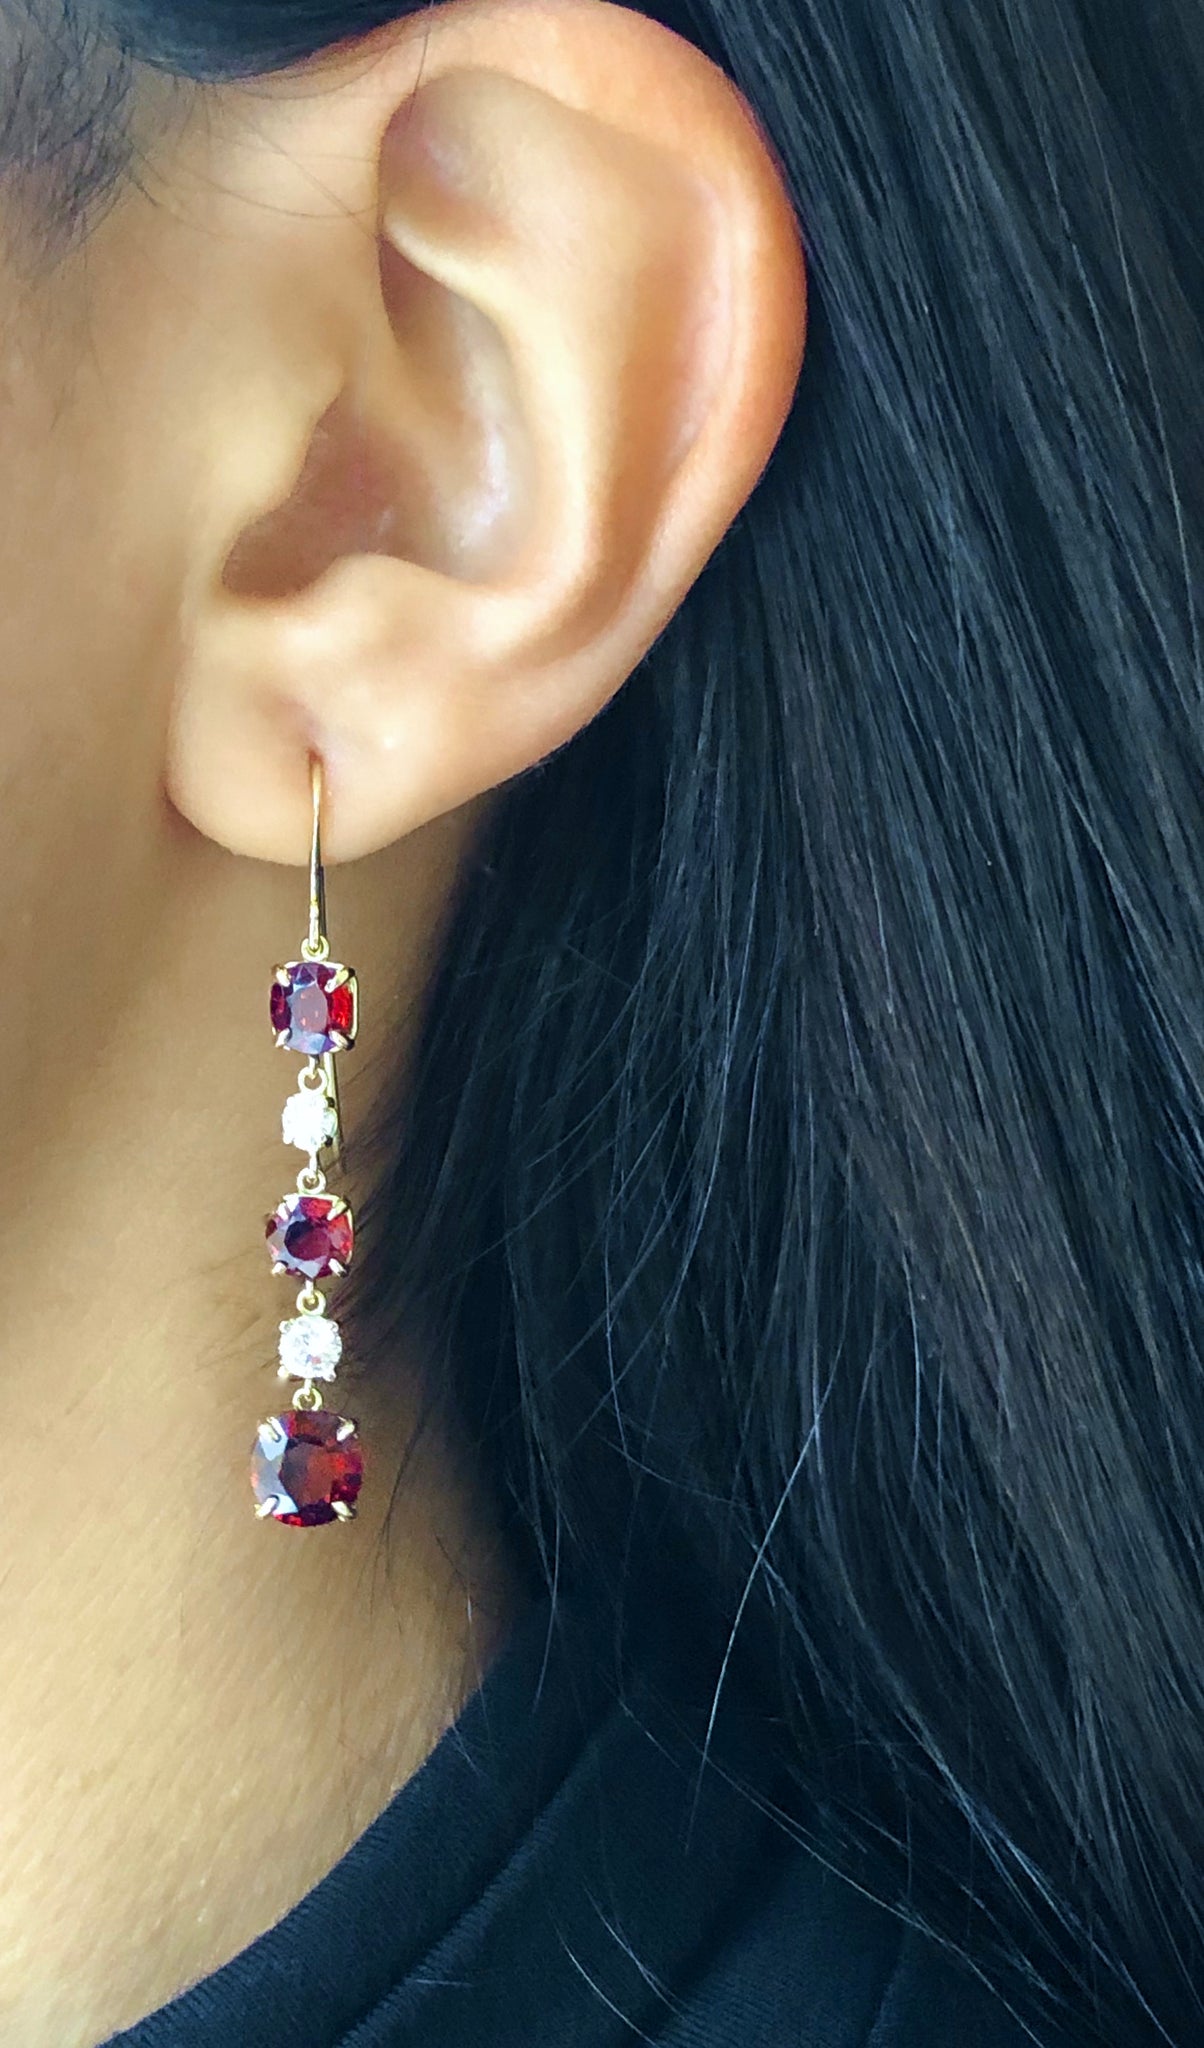 No Heat Red Spinel and Diamond Drop Earring 6.79 Carats